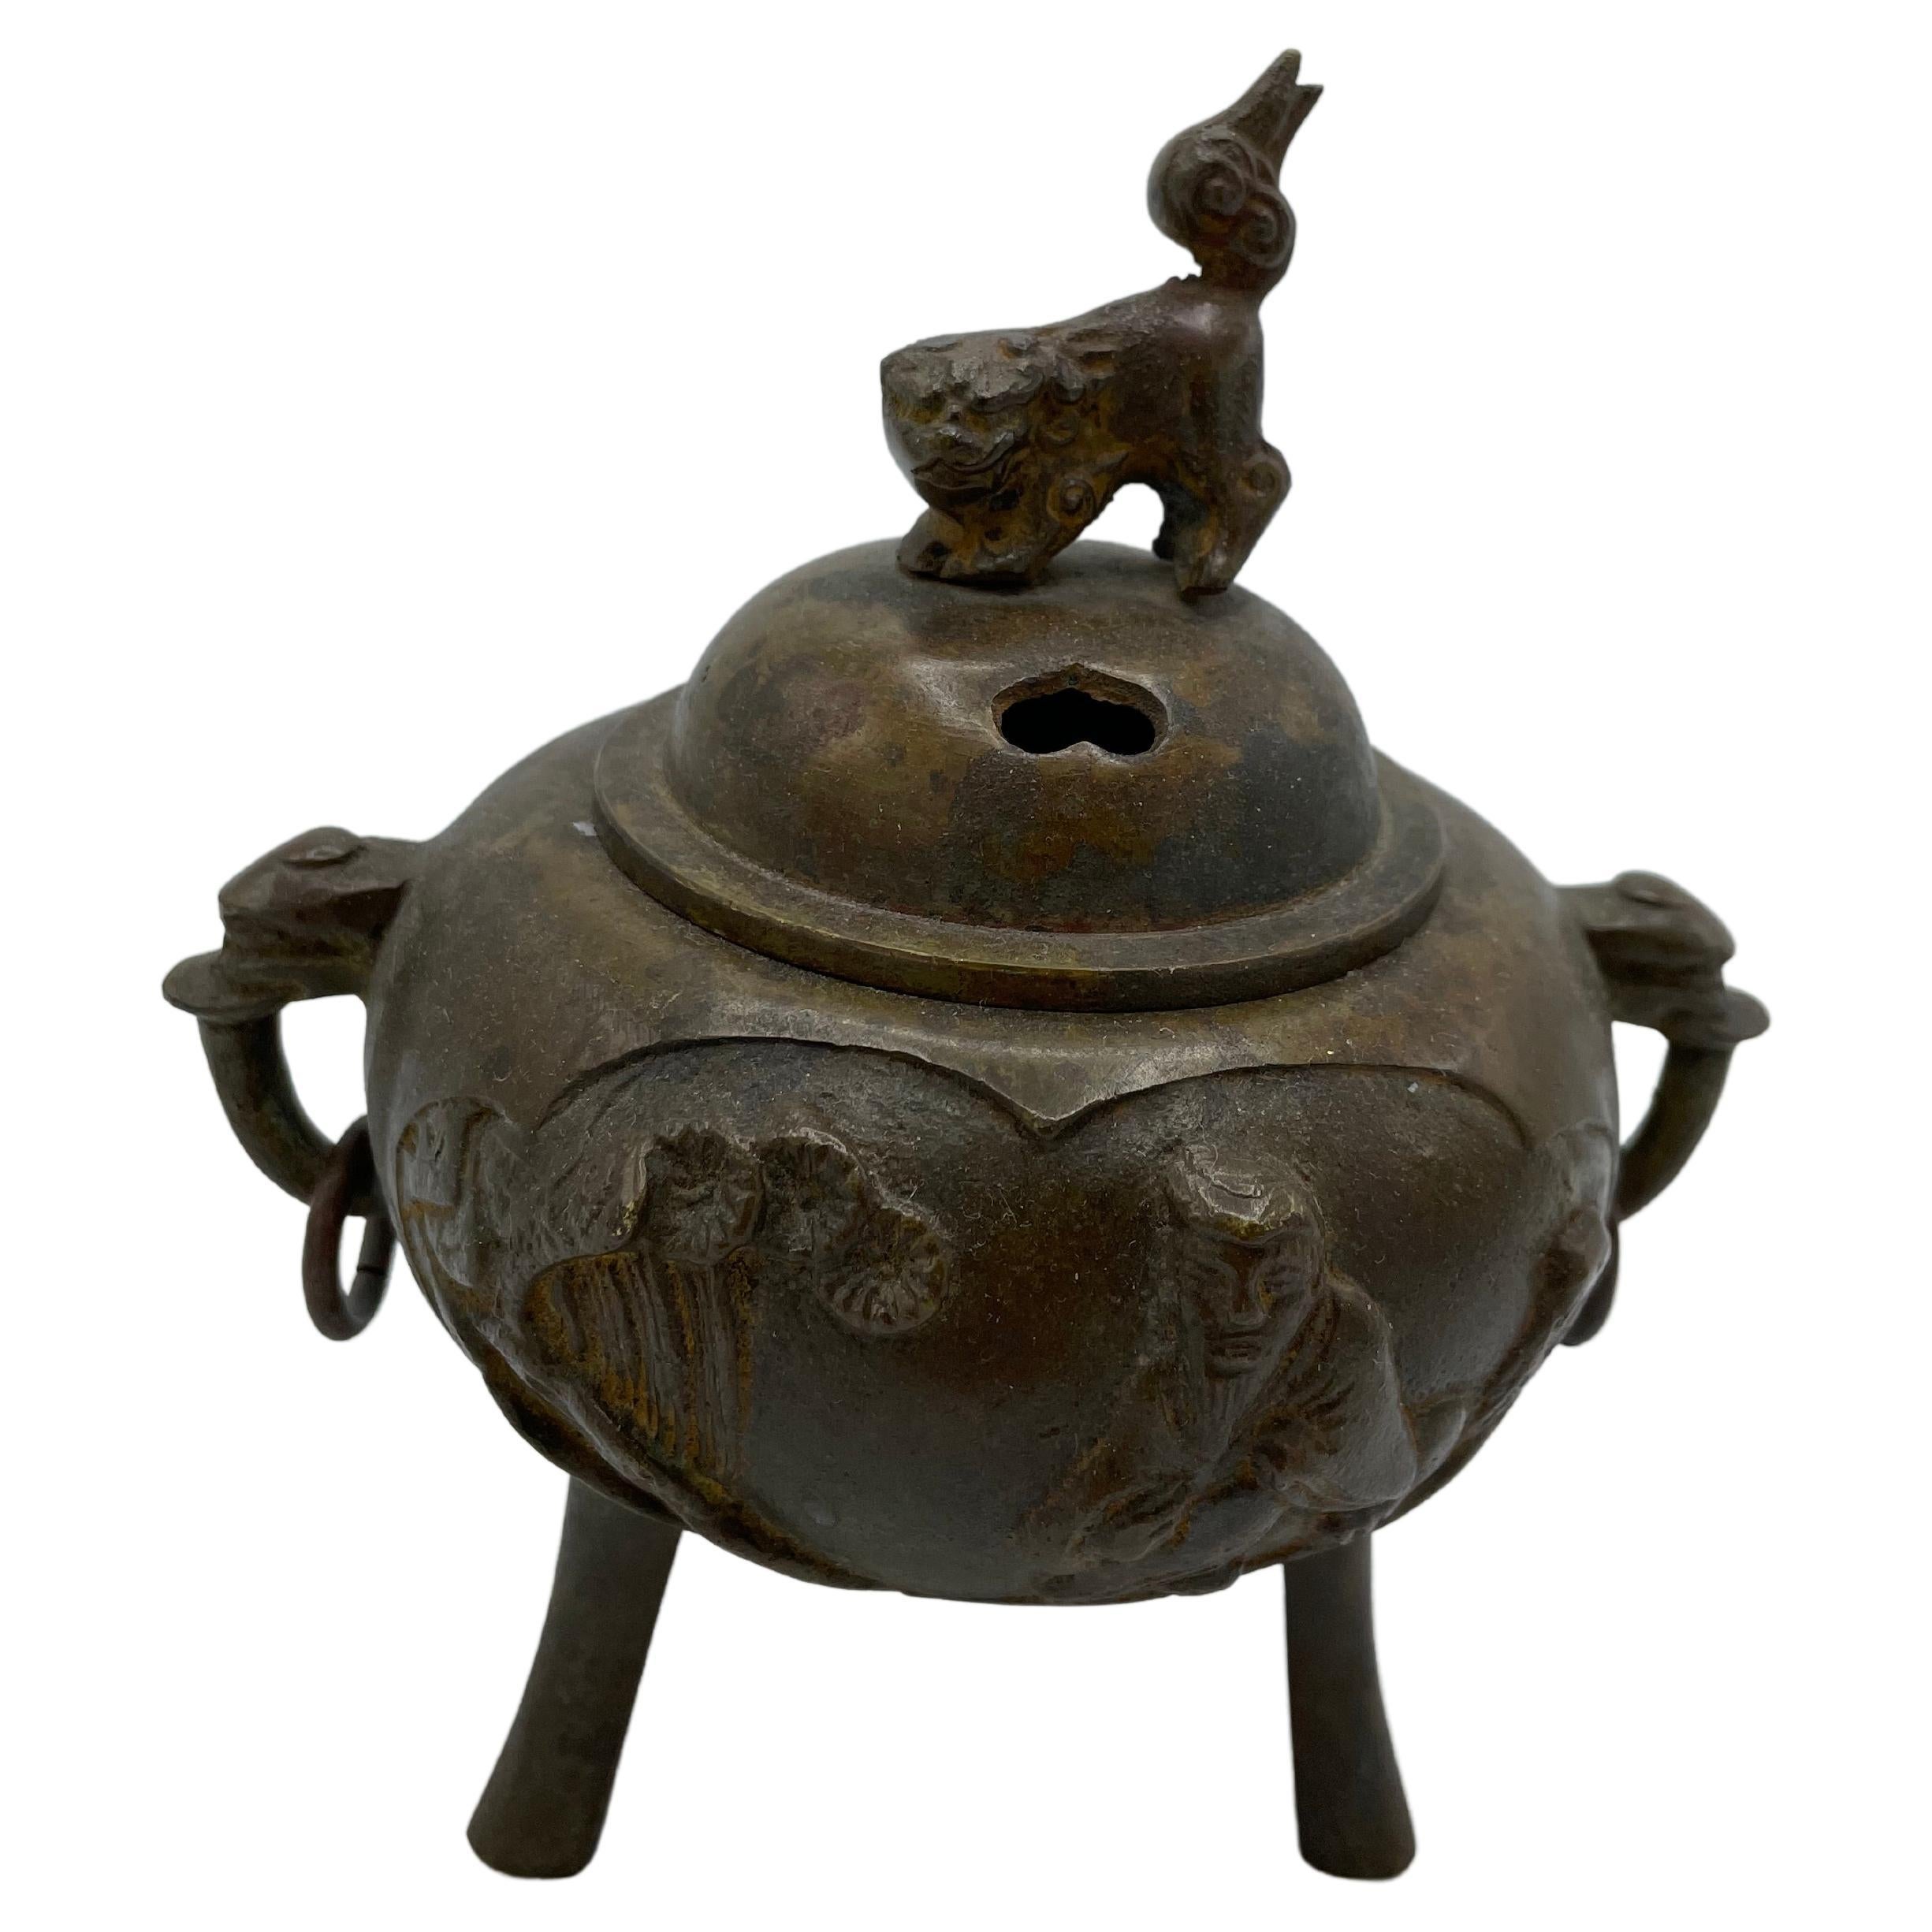 Antique Japanese Incense Burner with Iron in 1920s Taisho Era For Sale